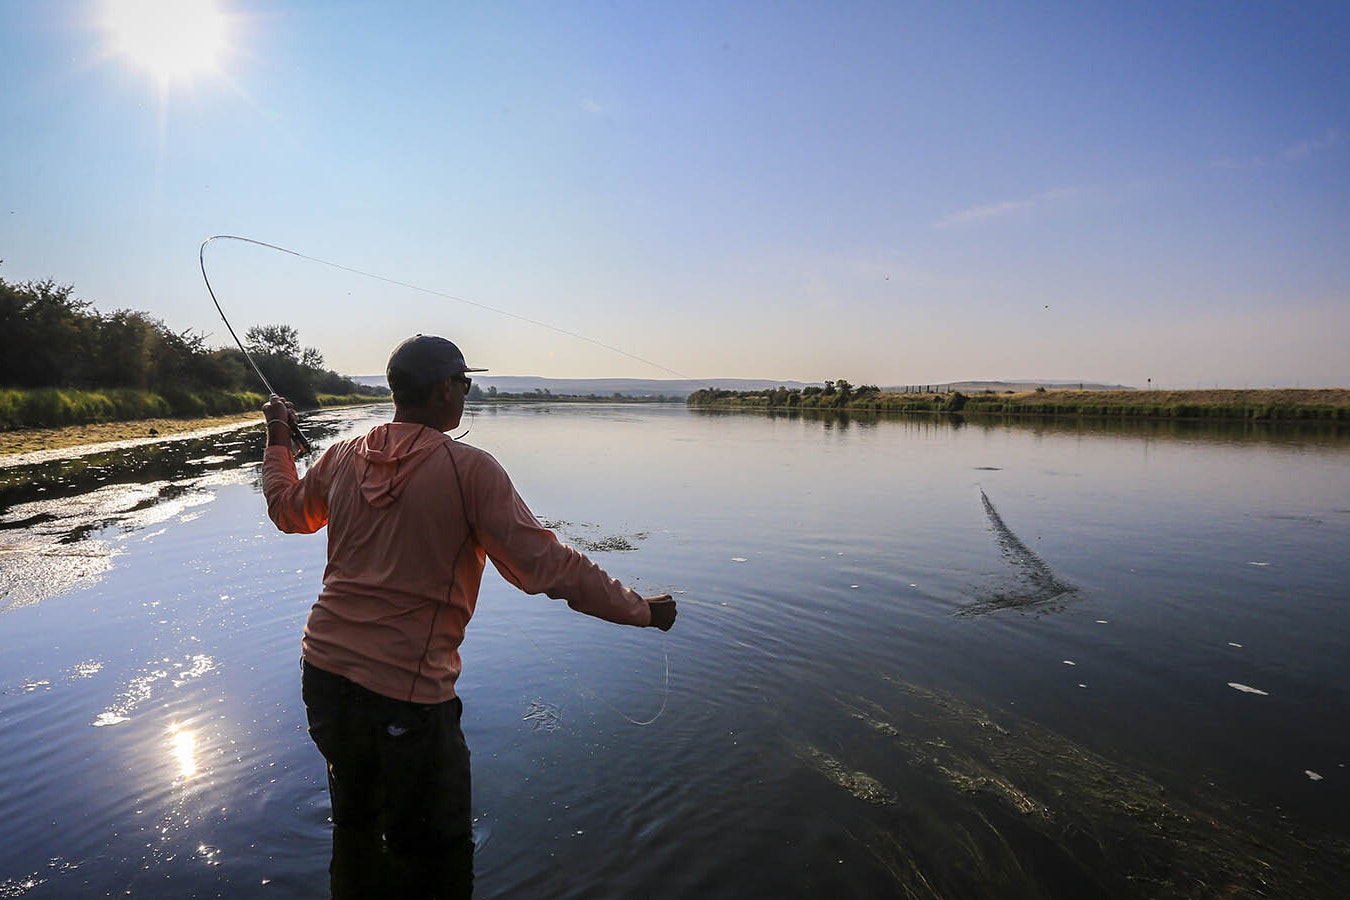 The Reef Fly Shop in Alcova offers guided fly fishing on a stretch of the North Platte River described as a “food factory.”